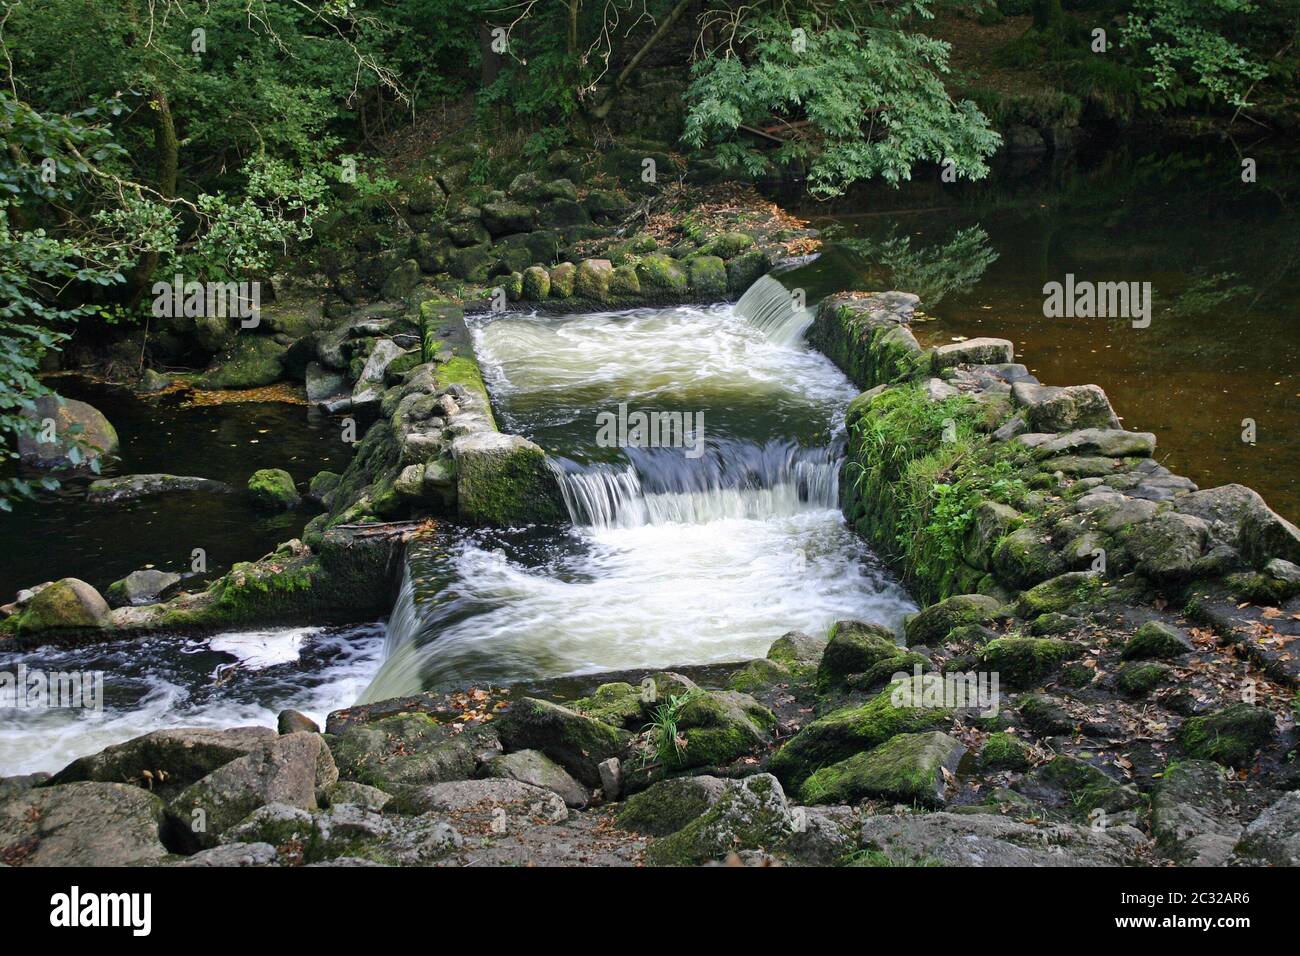 Double weir on a river of two linked pools and water flowing between them. Surrounded by rocks and trees. Stock Photo